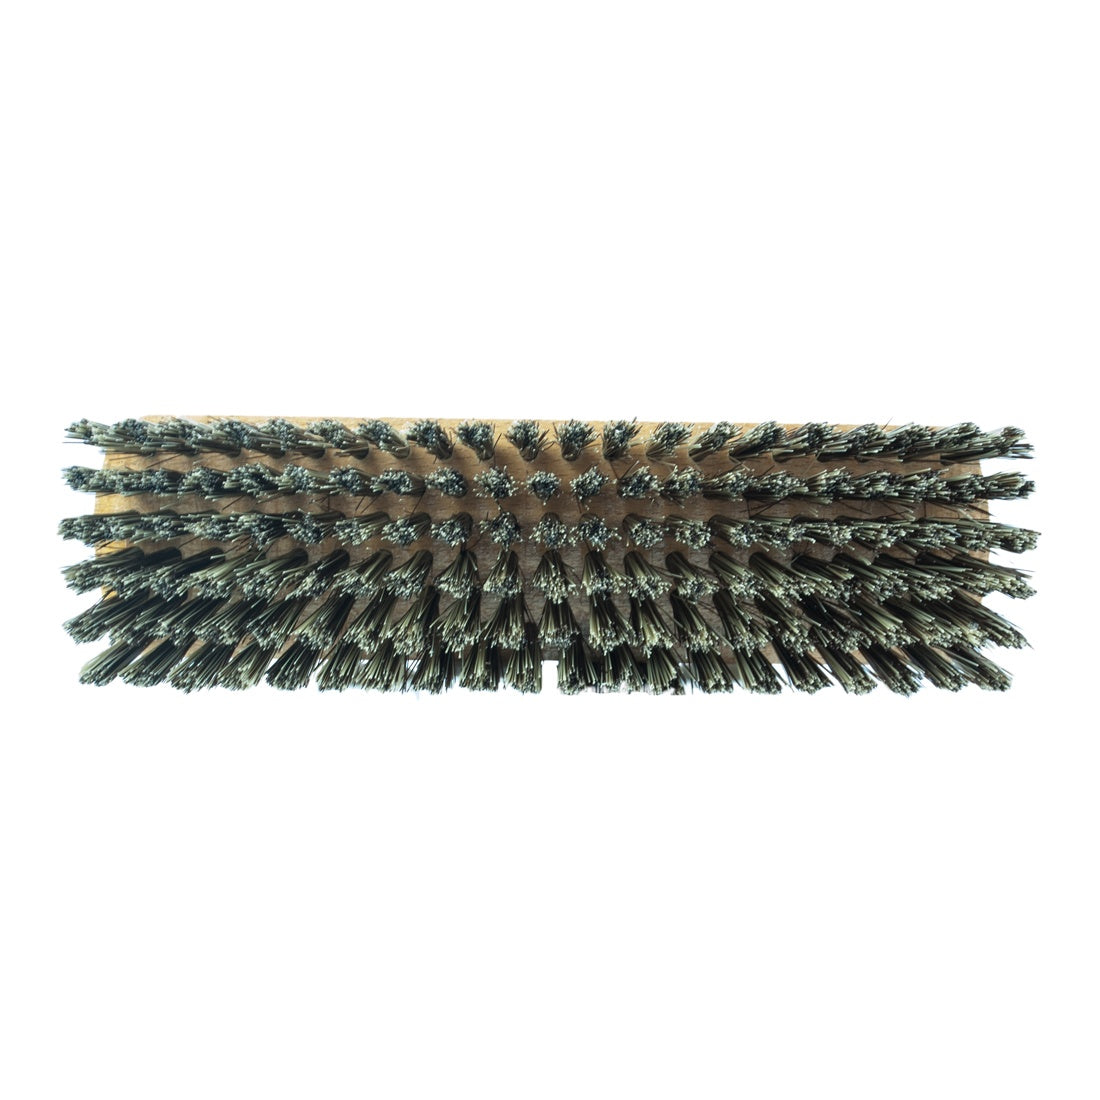 Pulex Brush for Clamp - Bottom View